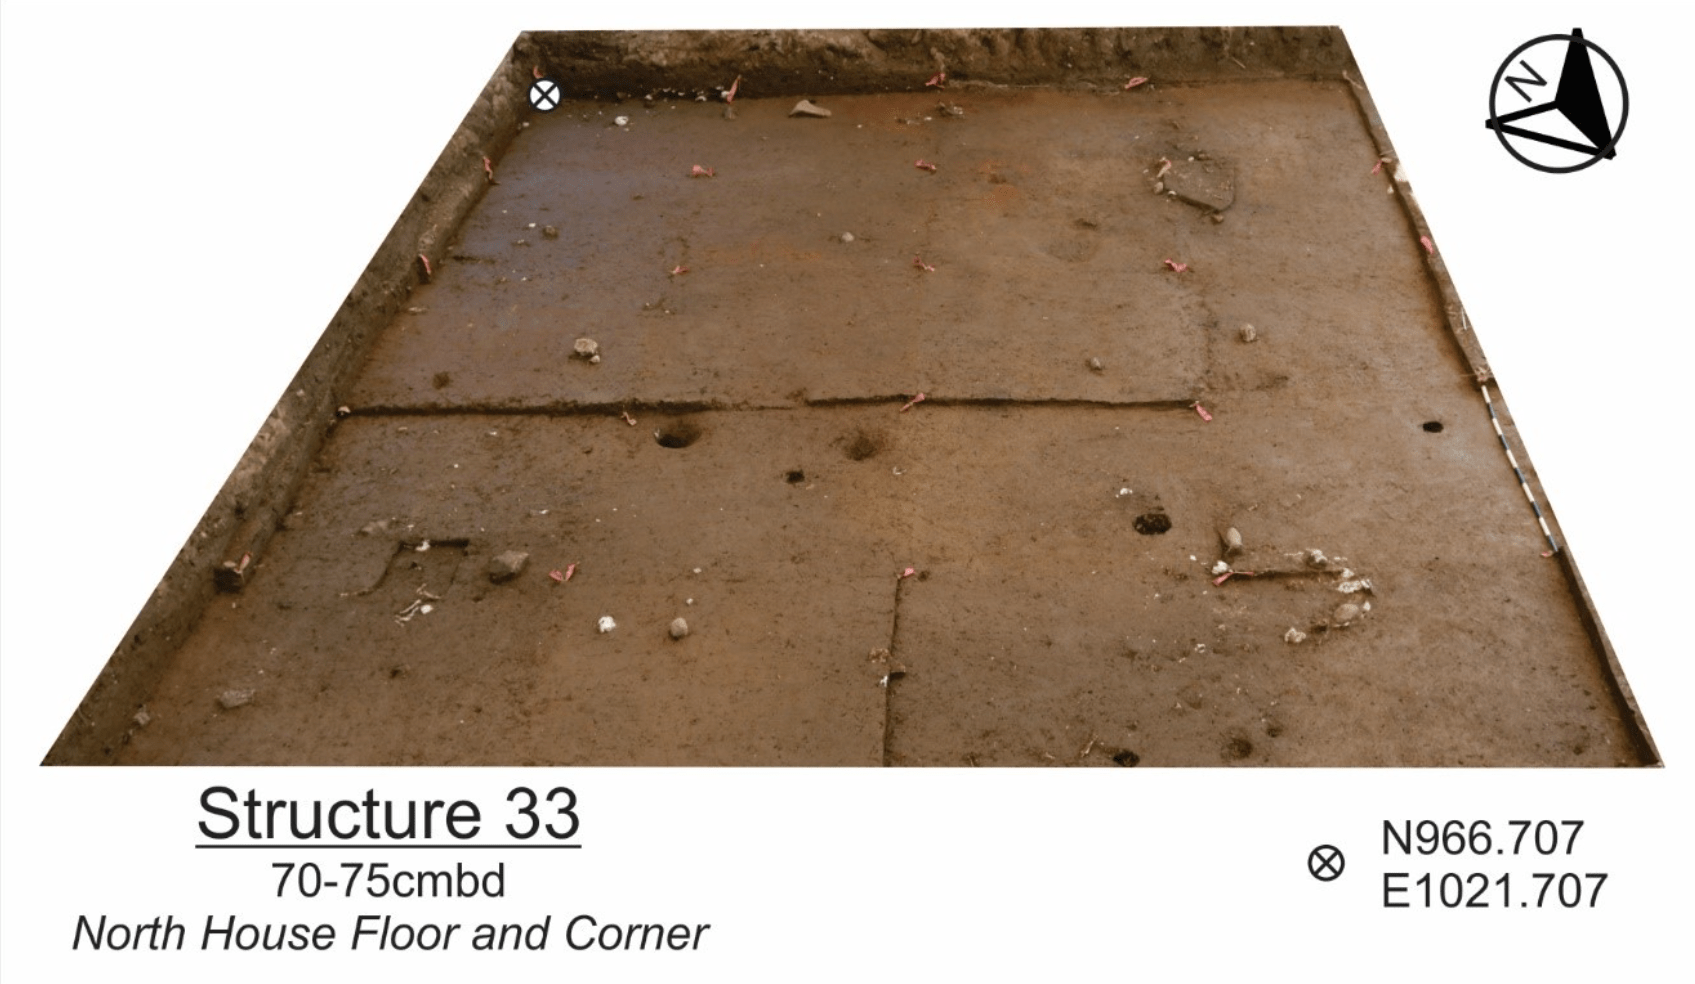 2020 Excavations. Can you see the floor at the corner of Structure 33?